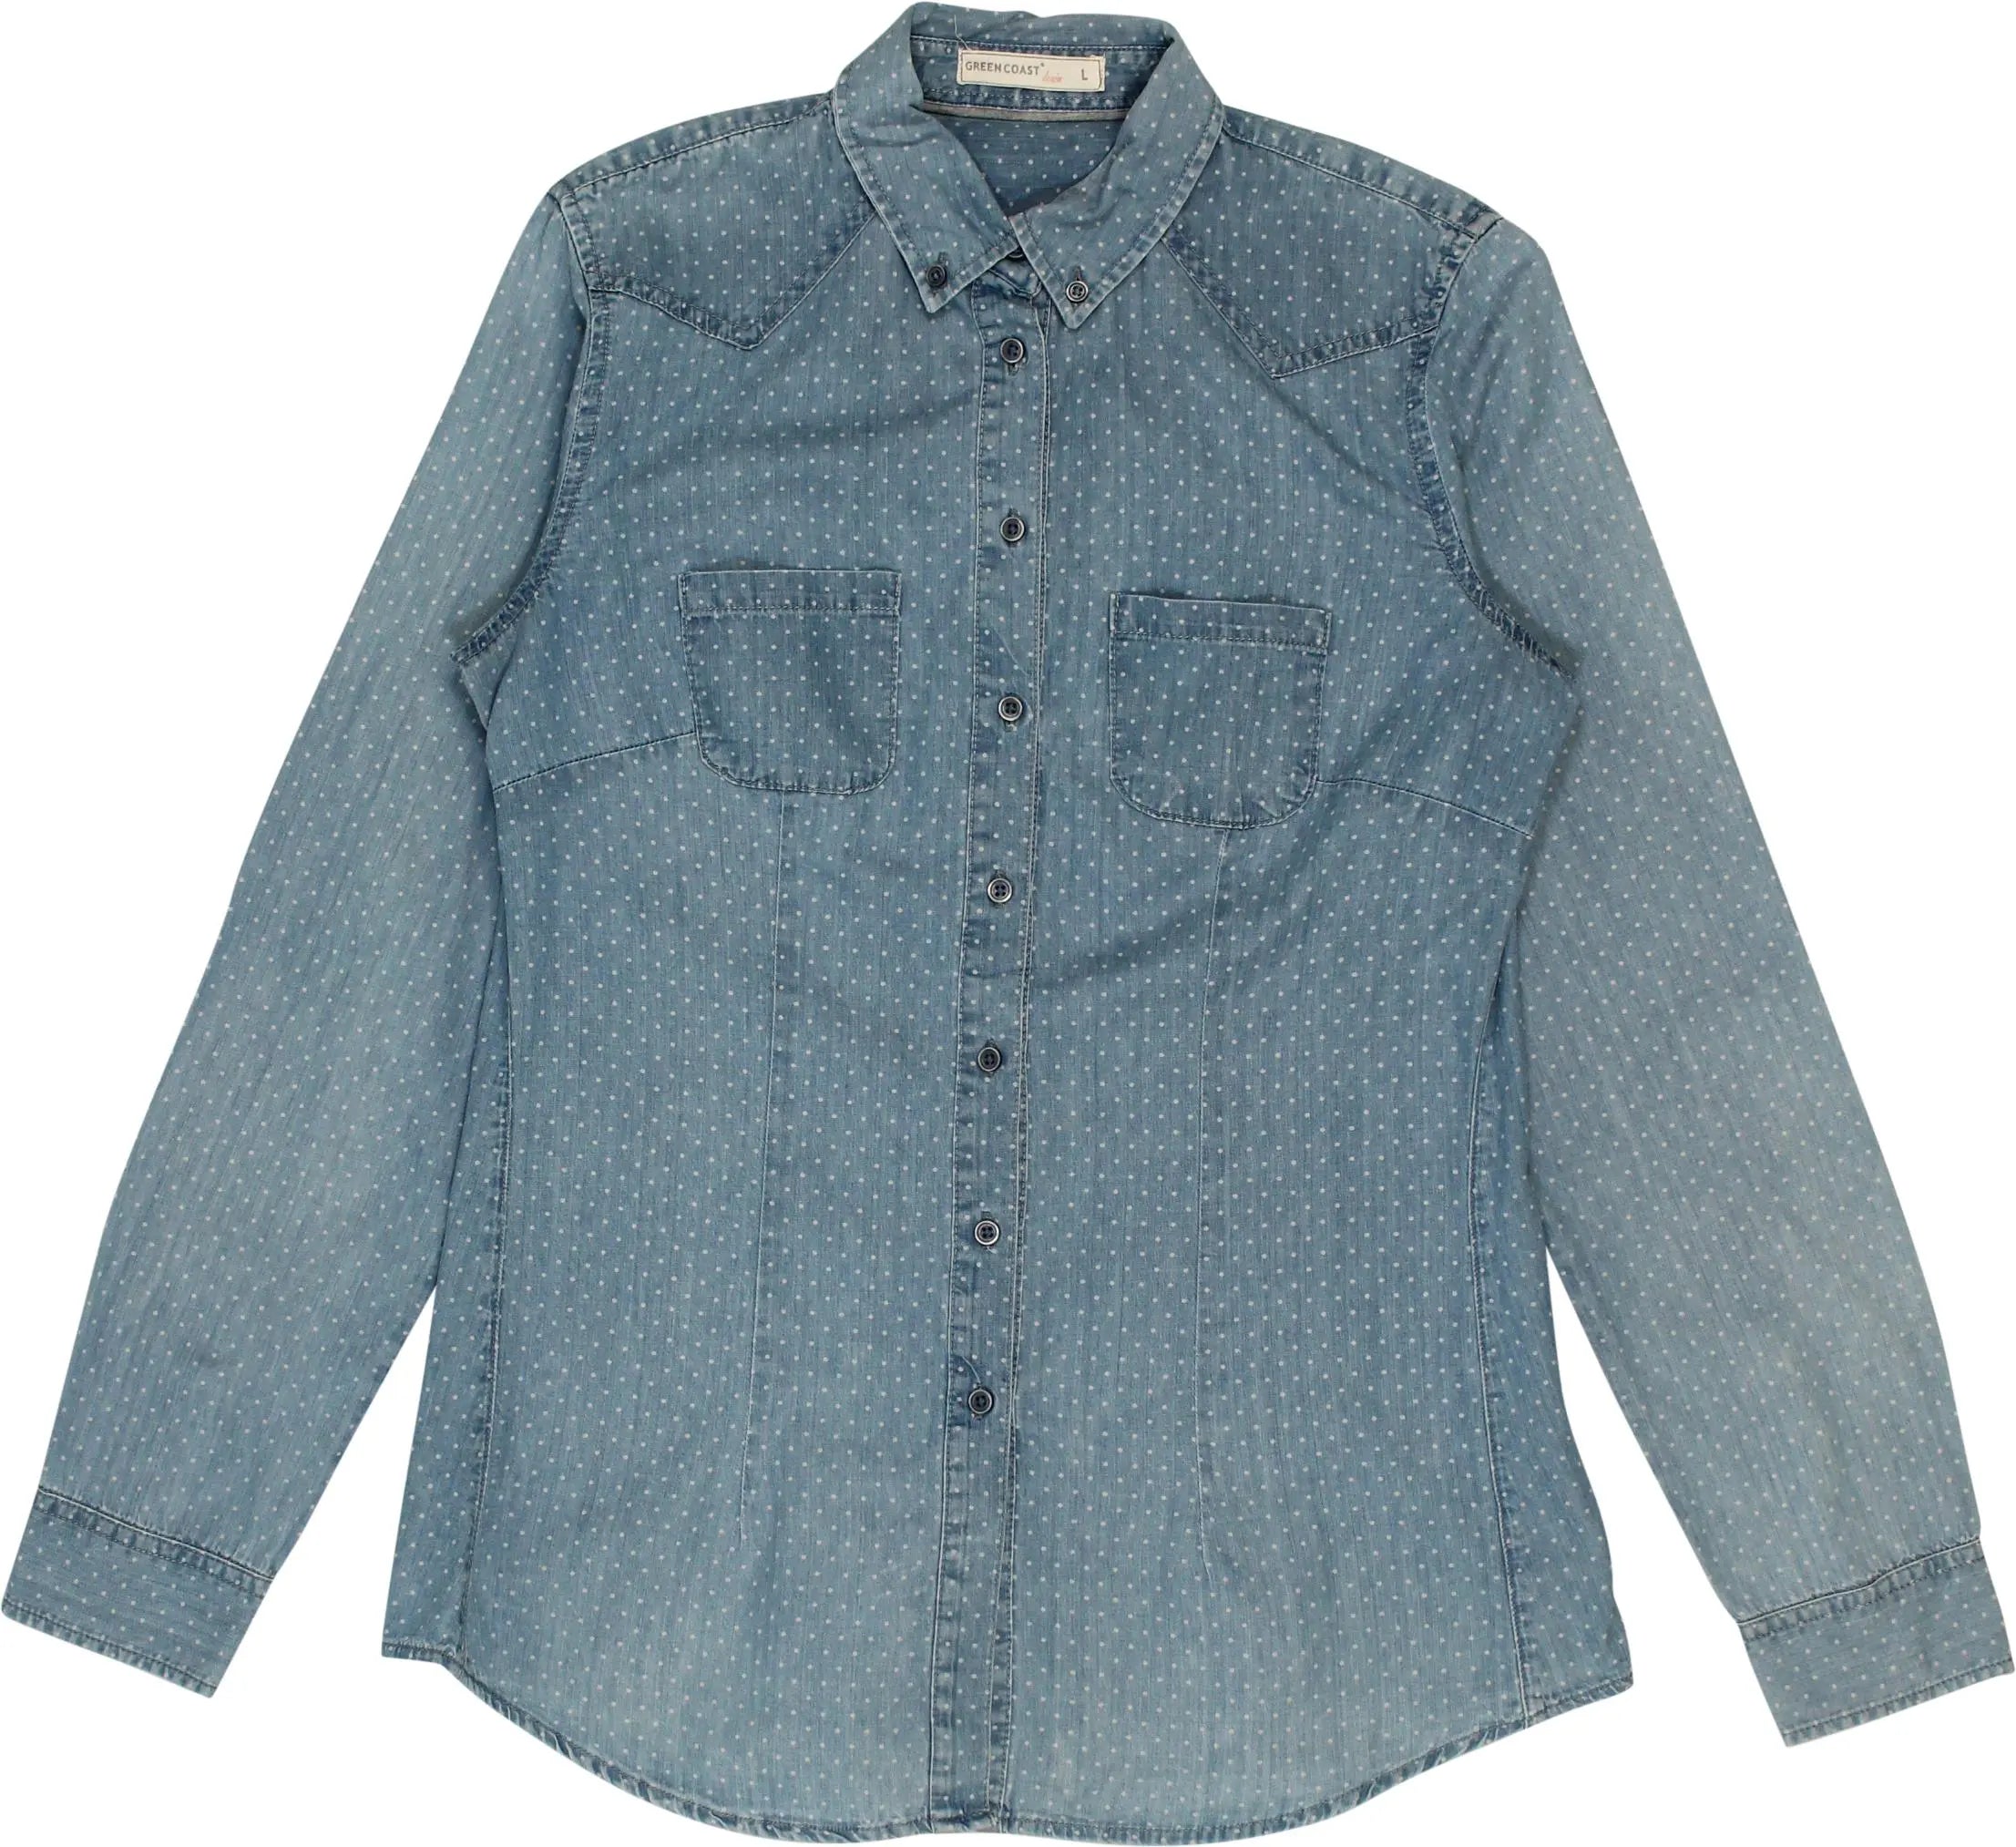 Greencoast - Denim Shirt with Polkadot Print- ThriftTale.com - Vintage and second handclothing